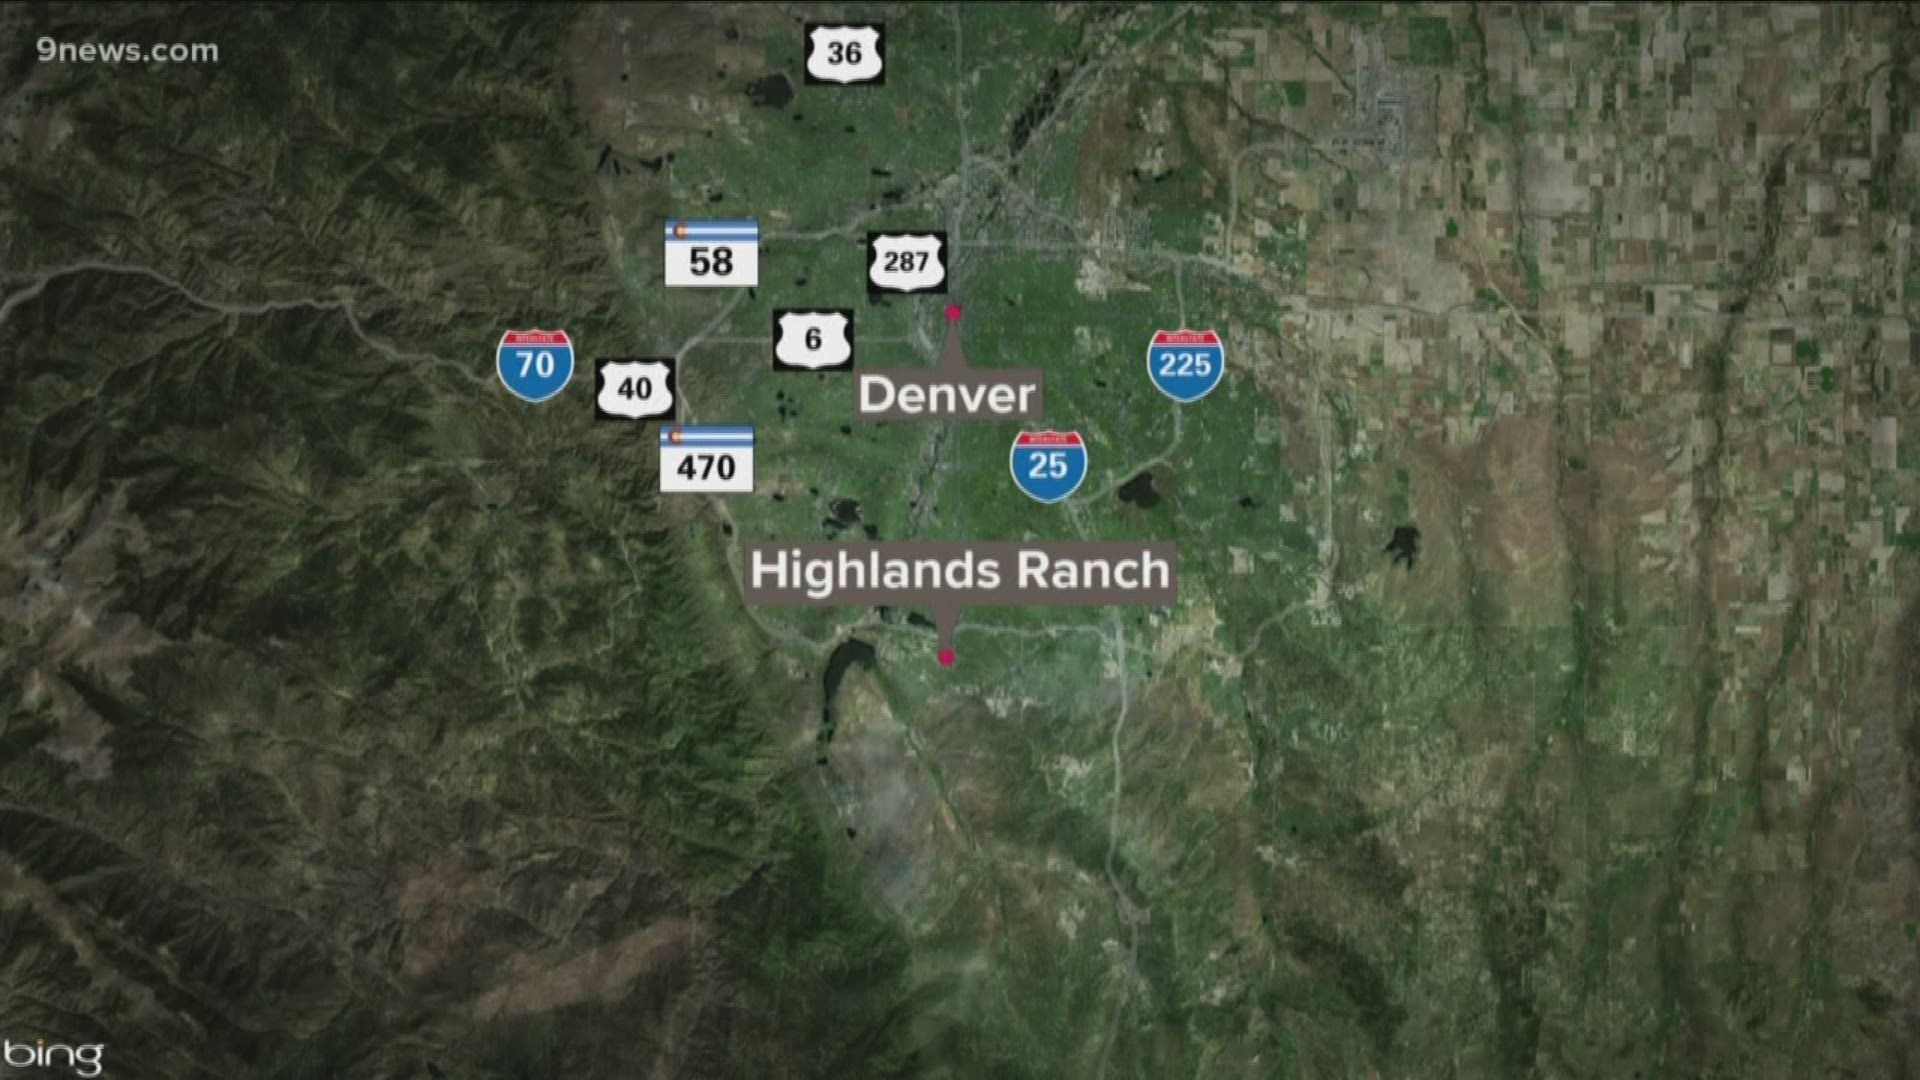 The victim was hit not far from Rock Canyon High School in Highlands Ranch.